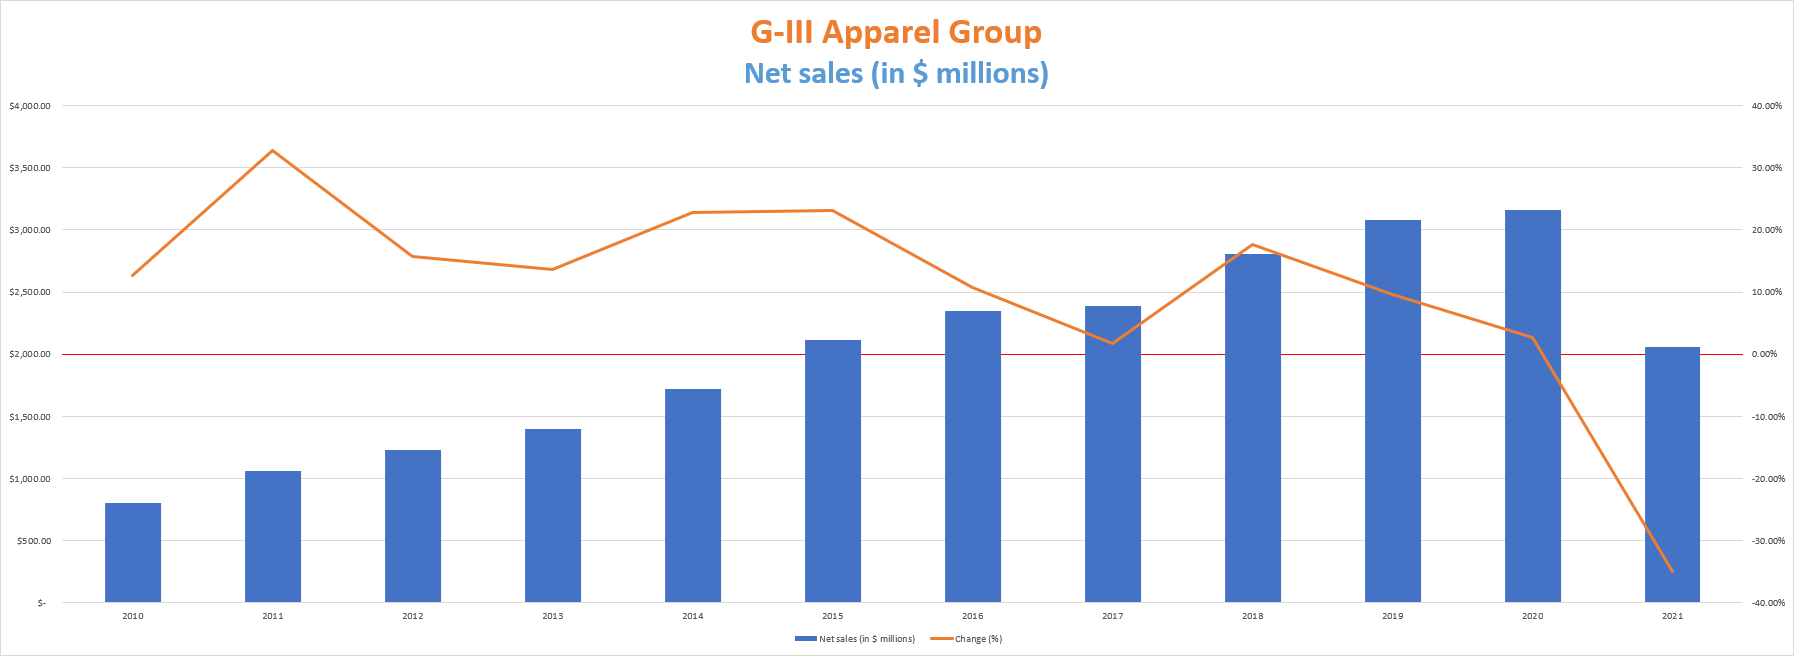 G-III Apparel updates Q4 and FY '17 guidance